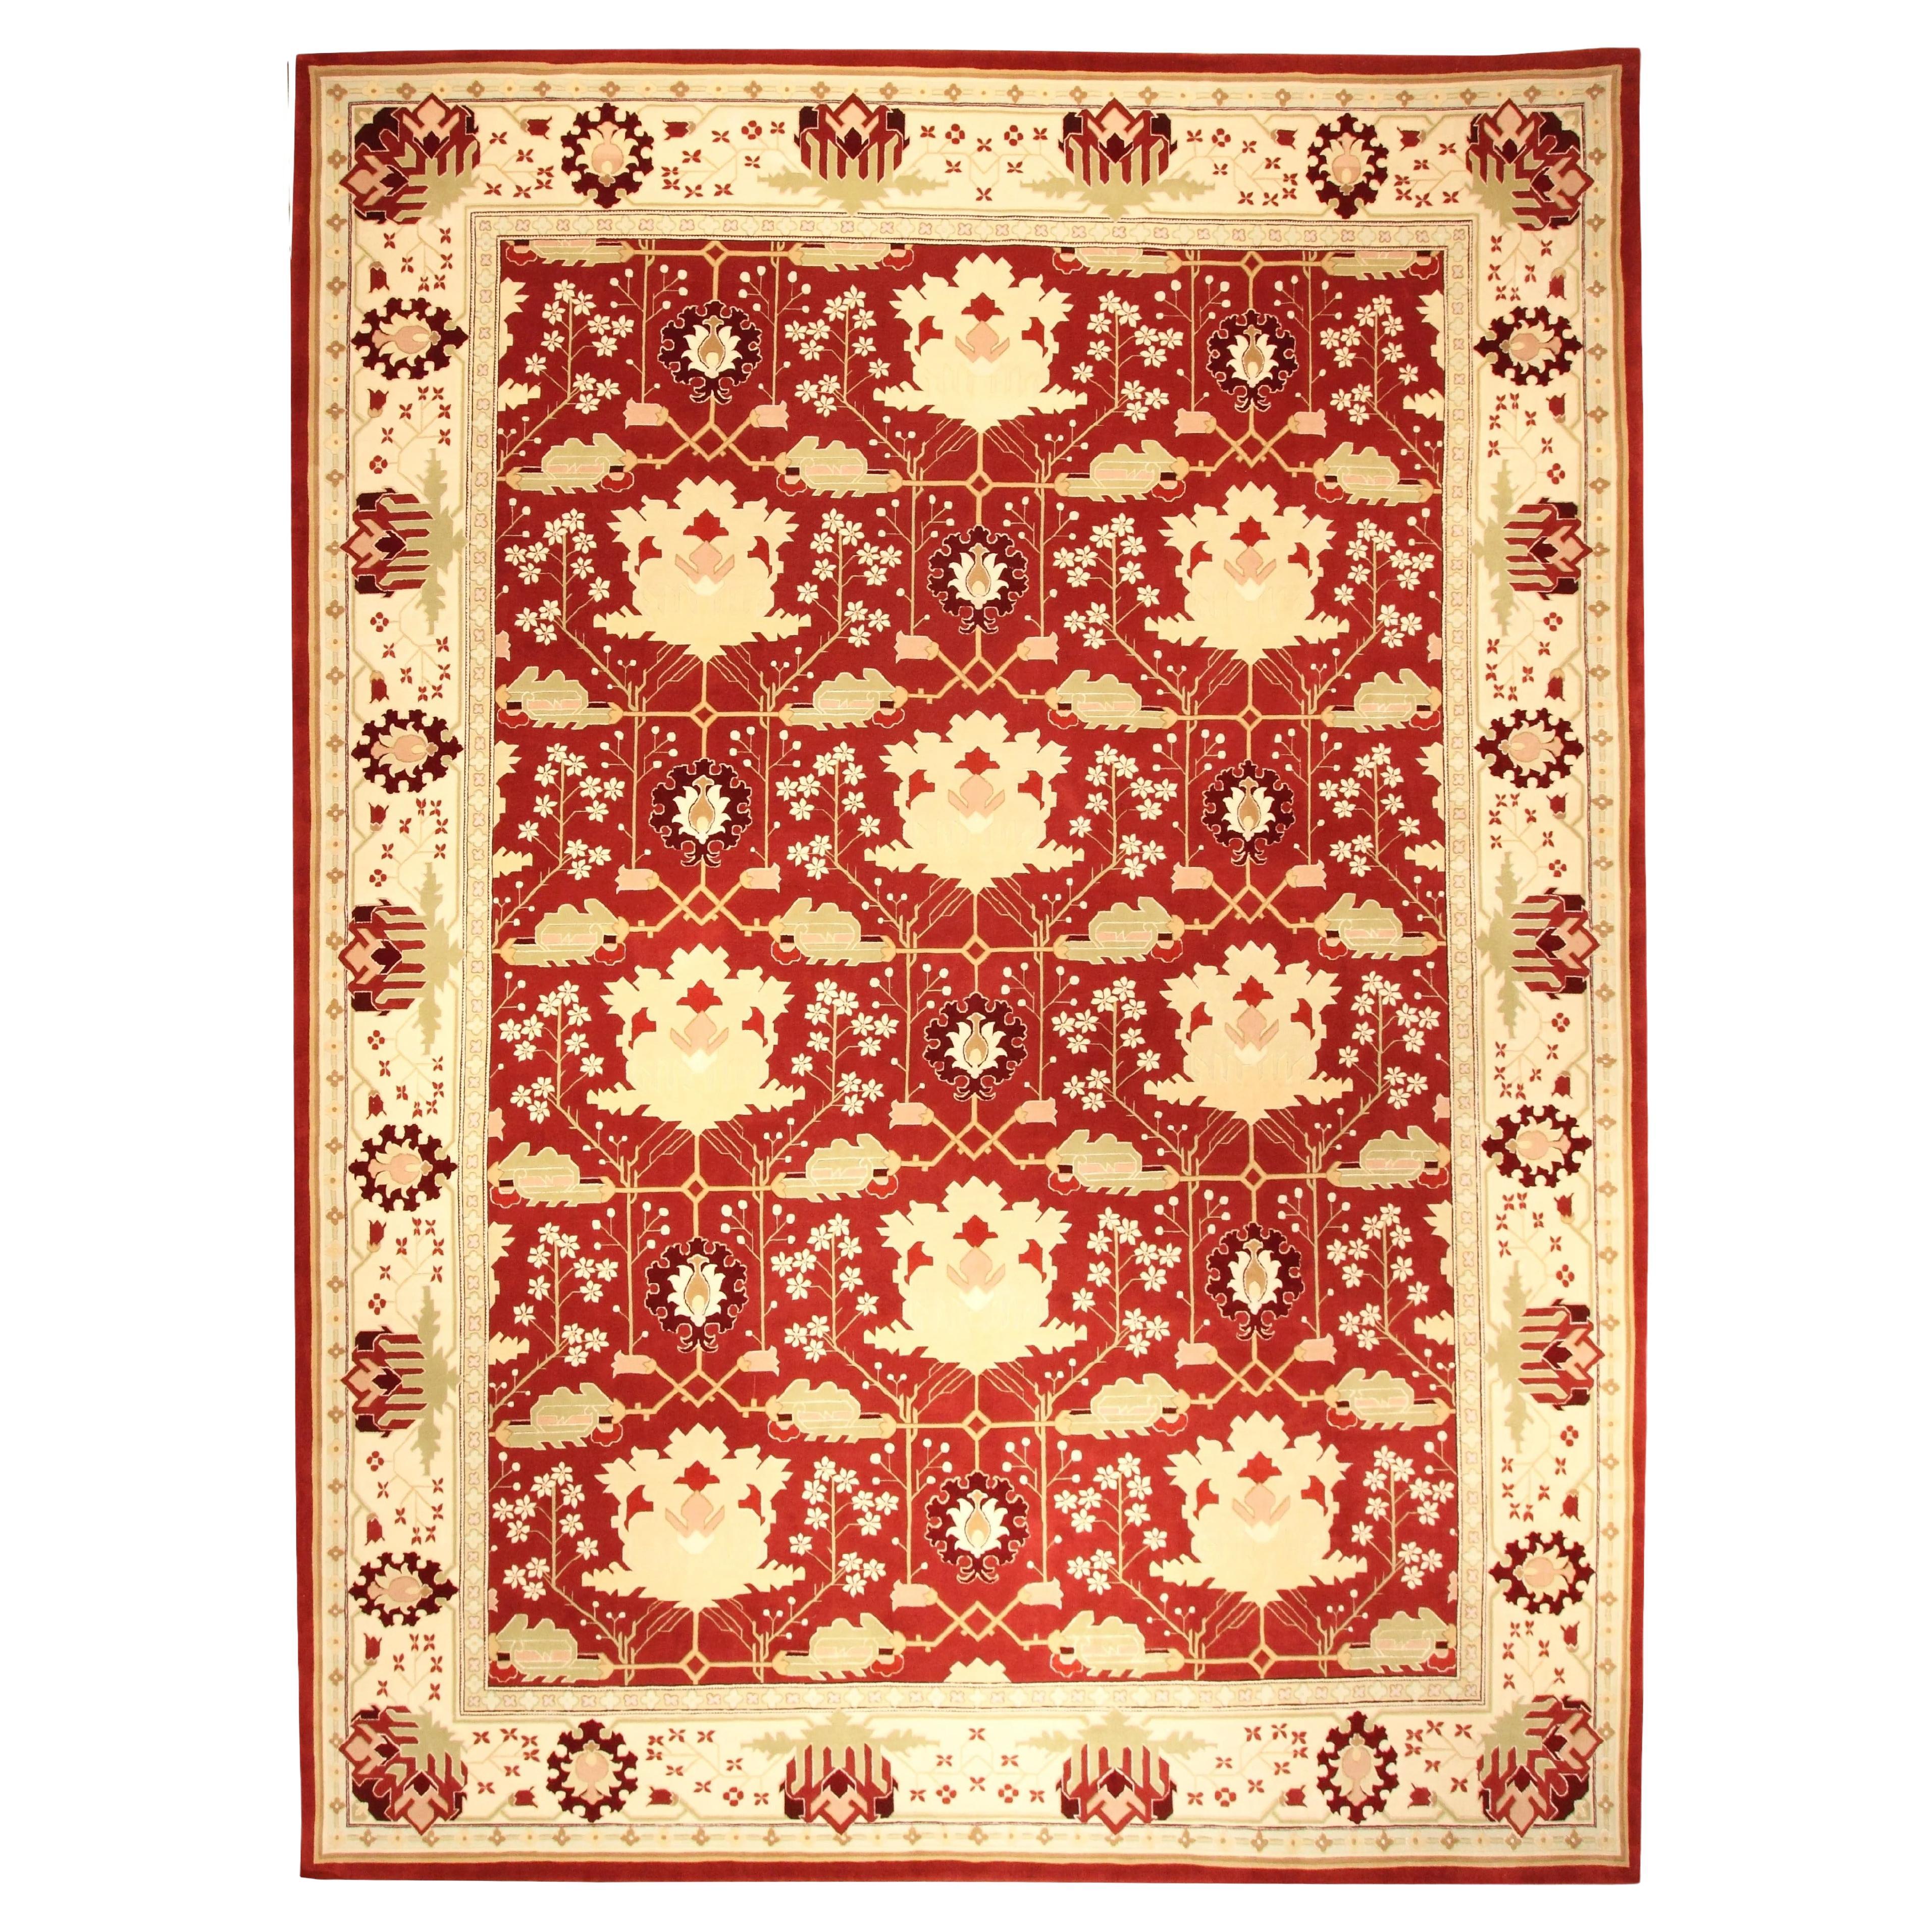 VIA COMO 'Japures' Hand Knotted Wool and Silk Rug 10x14 ft One of a Kind Carpet For Sale